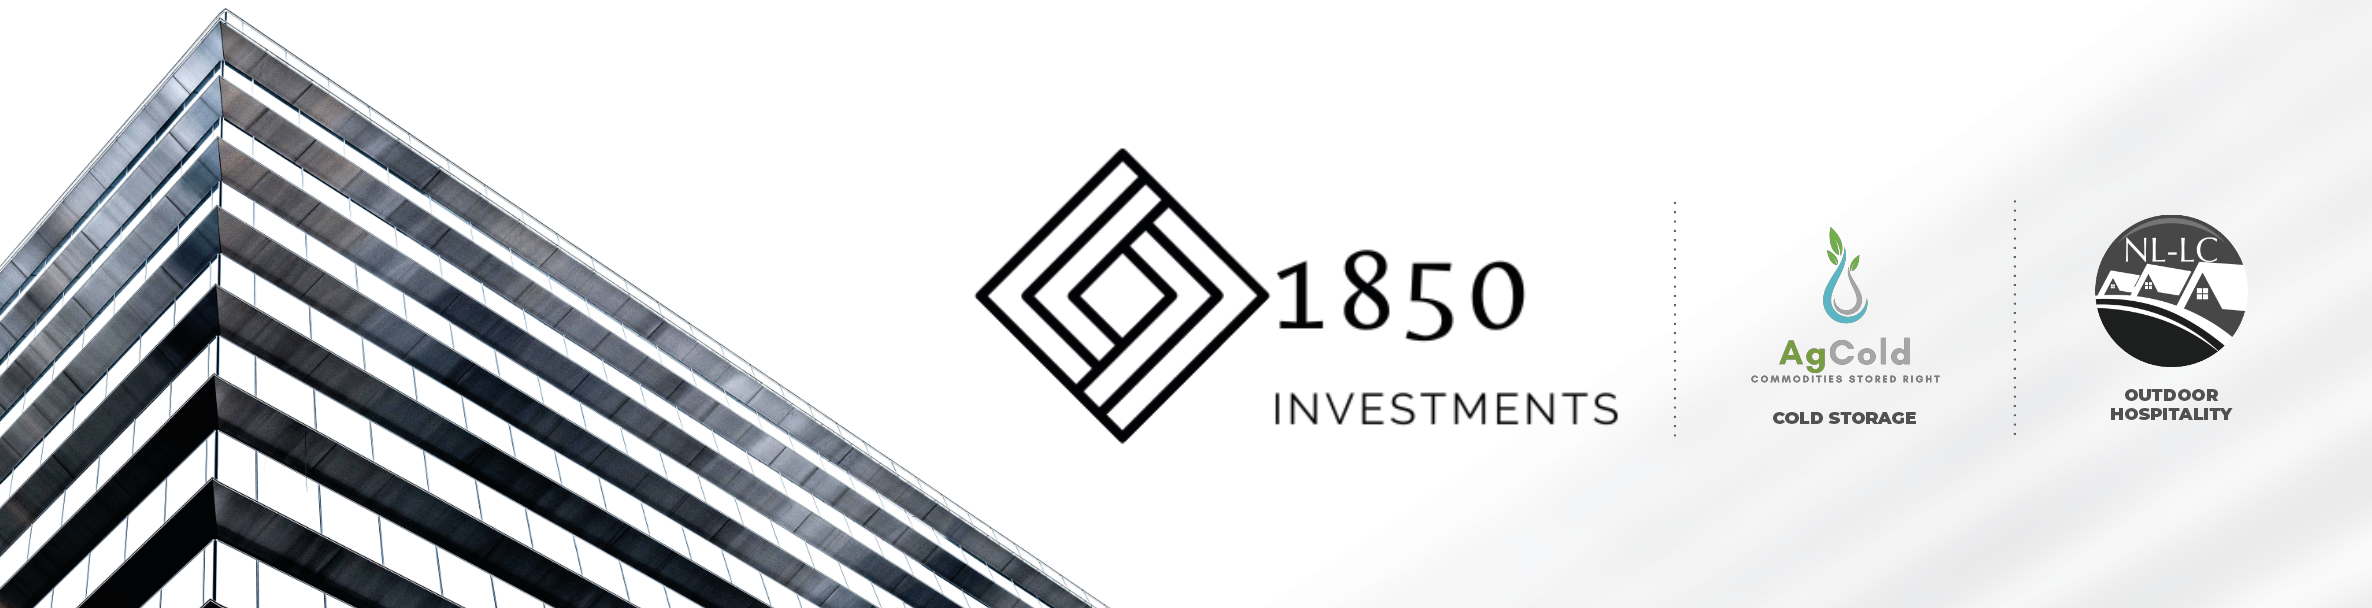 1850 Investments